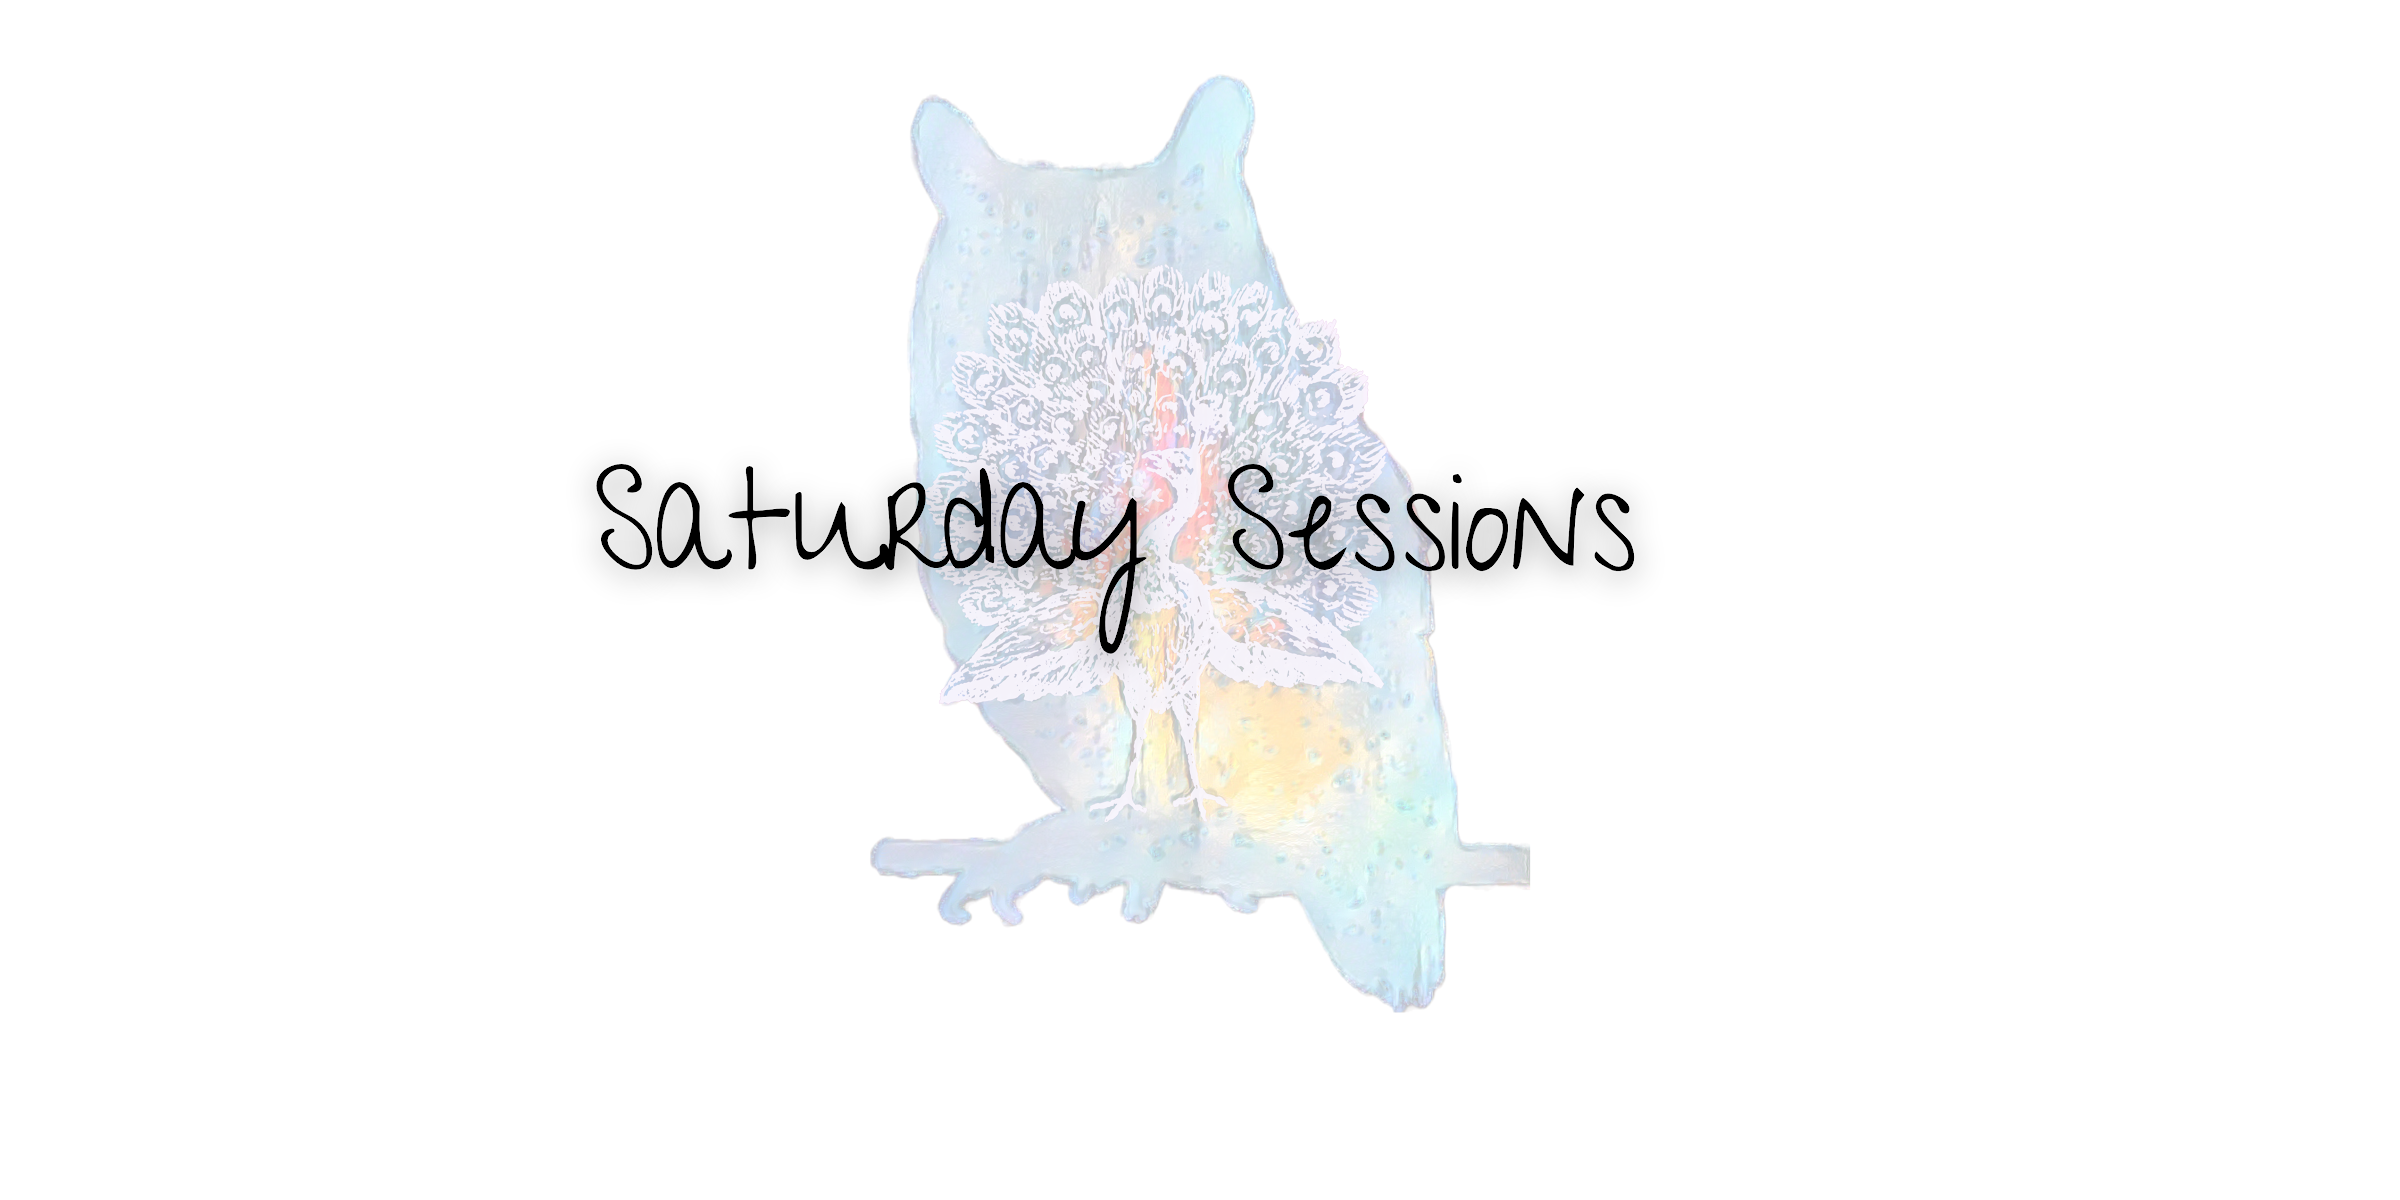 Saturday Sessions: My Journey Back to School and the Lessons Learned from Community